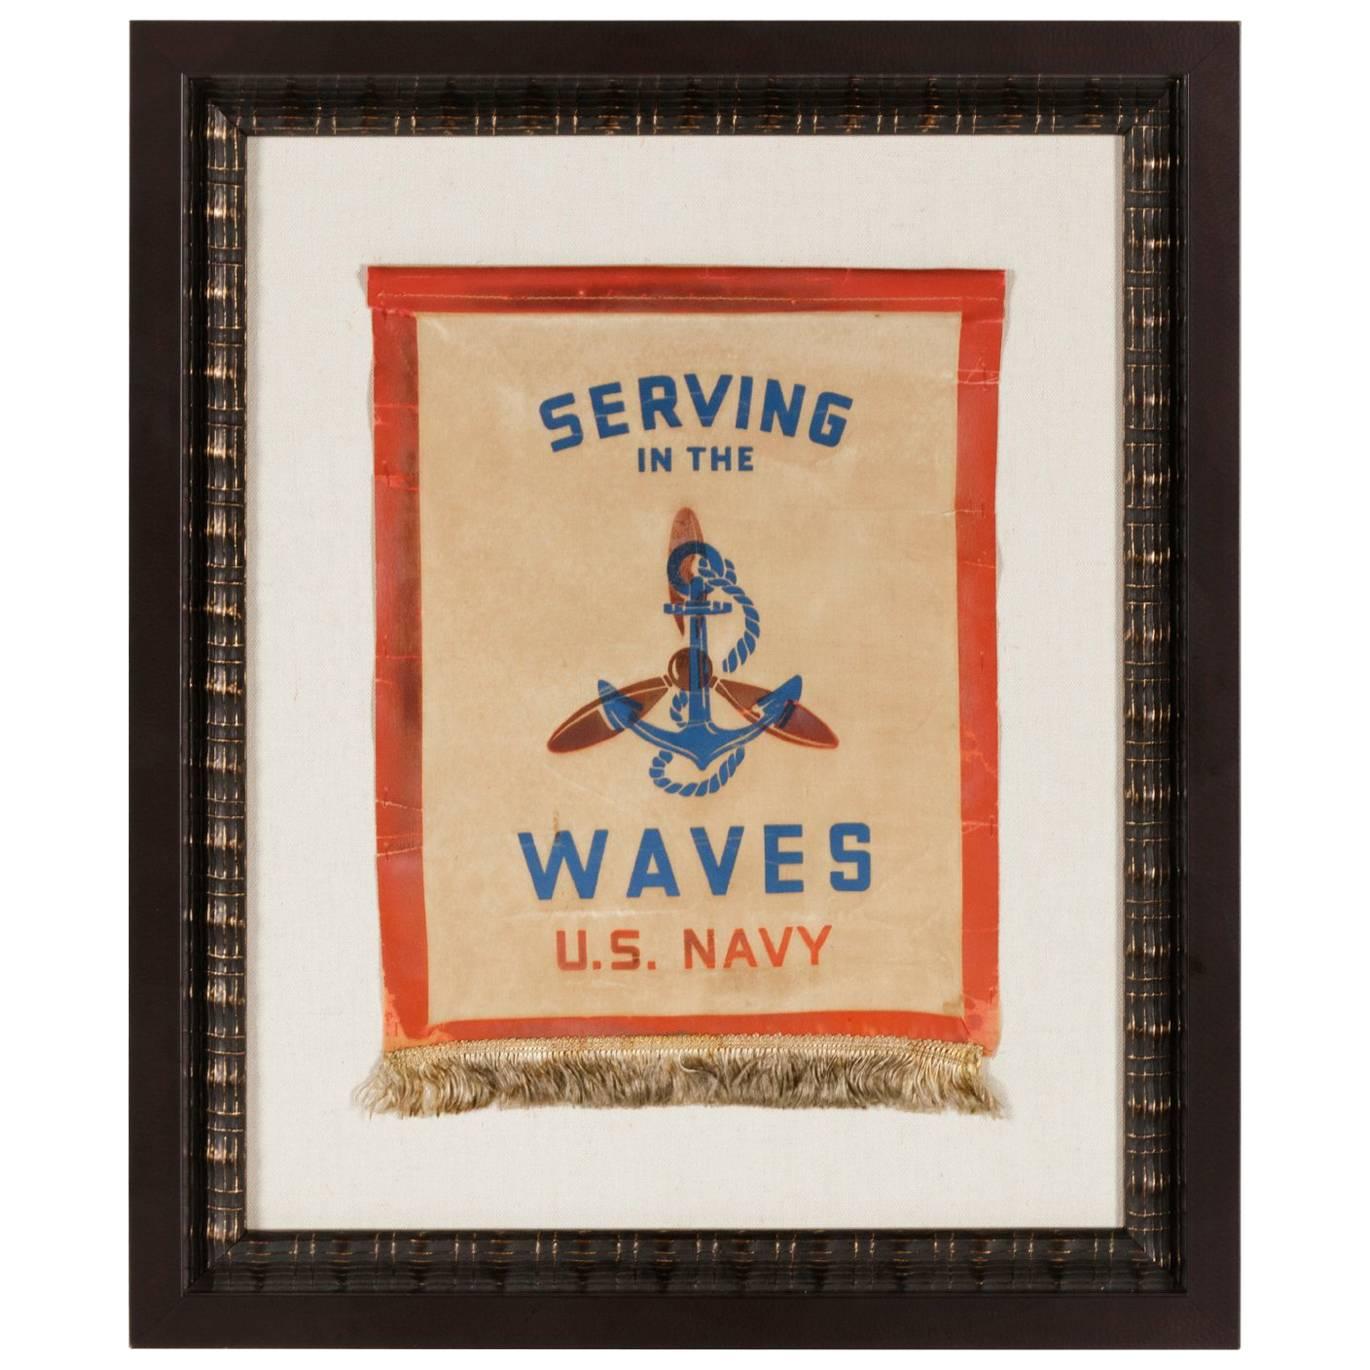 Serving in the Waves, an Extremely Rare WWII Service Banner